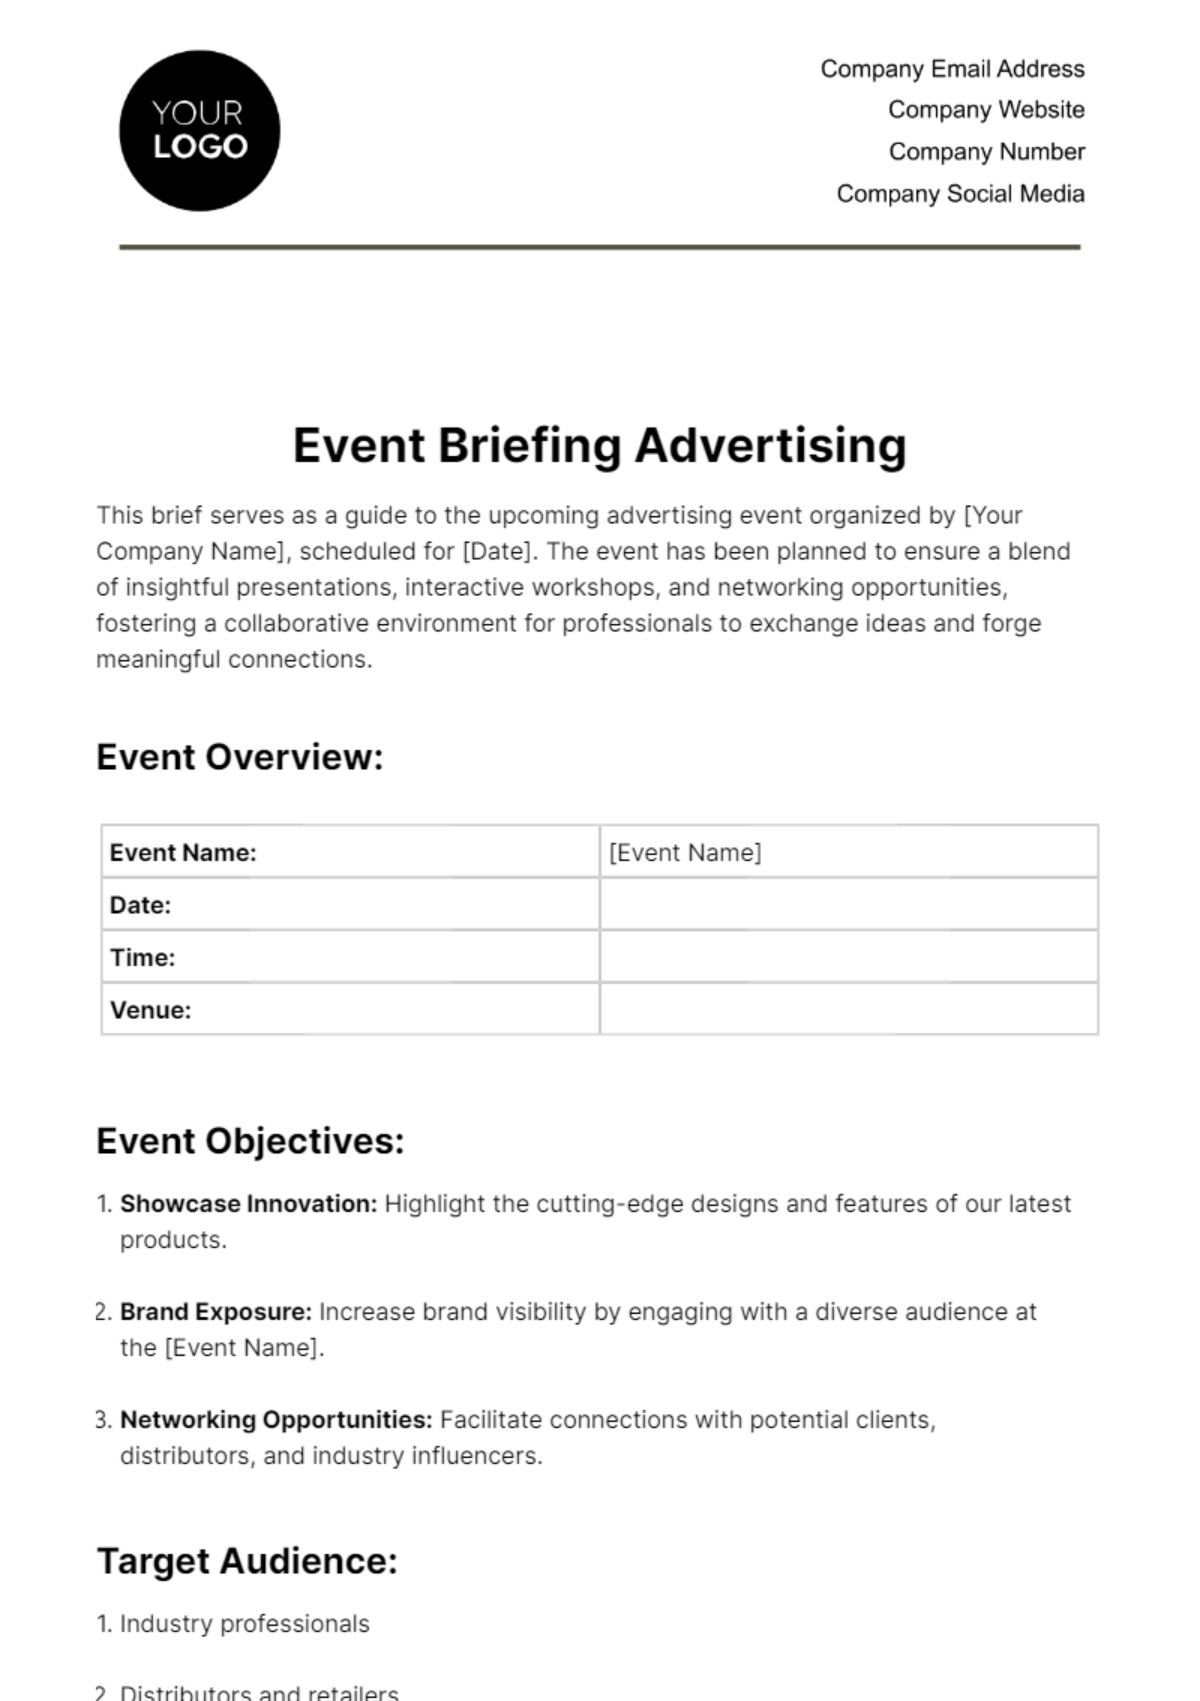 Free Event Briefing Advertising Template